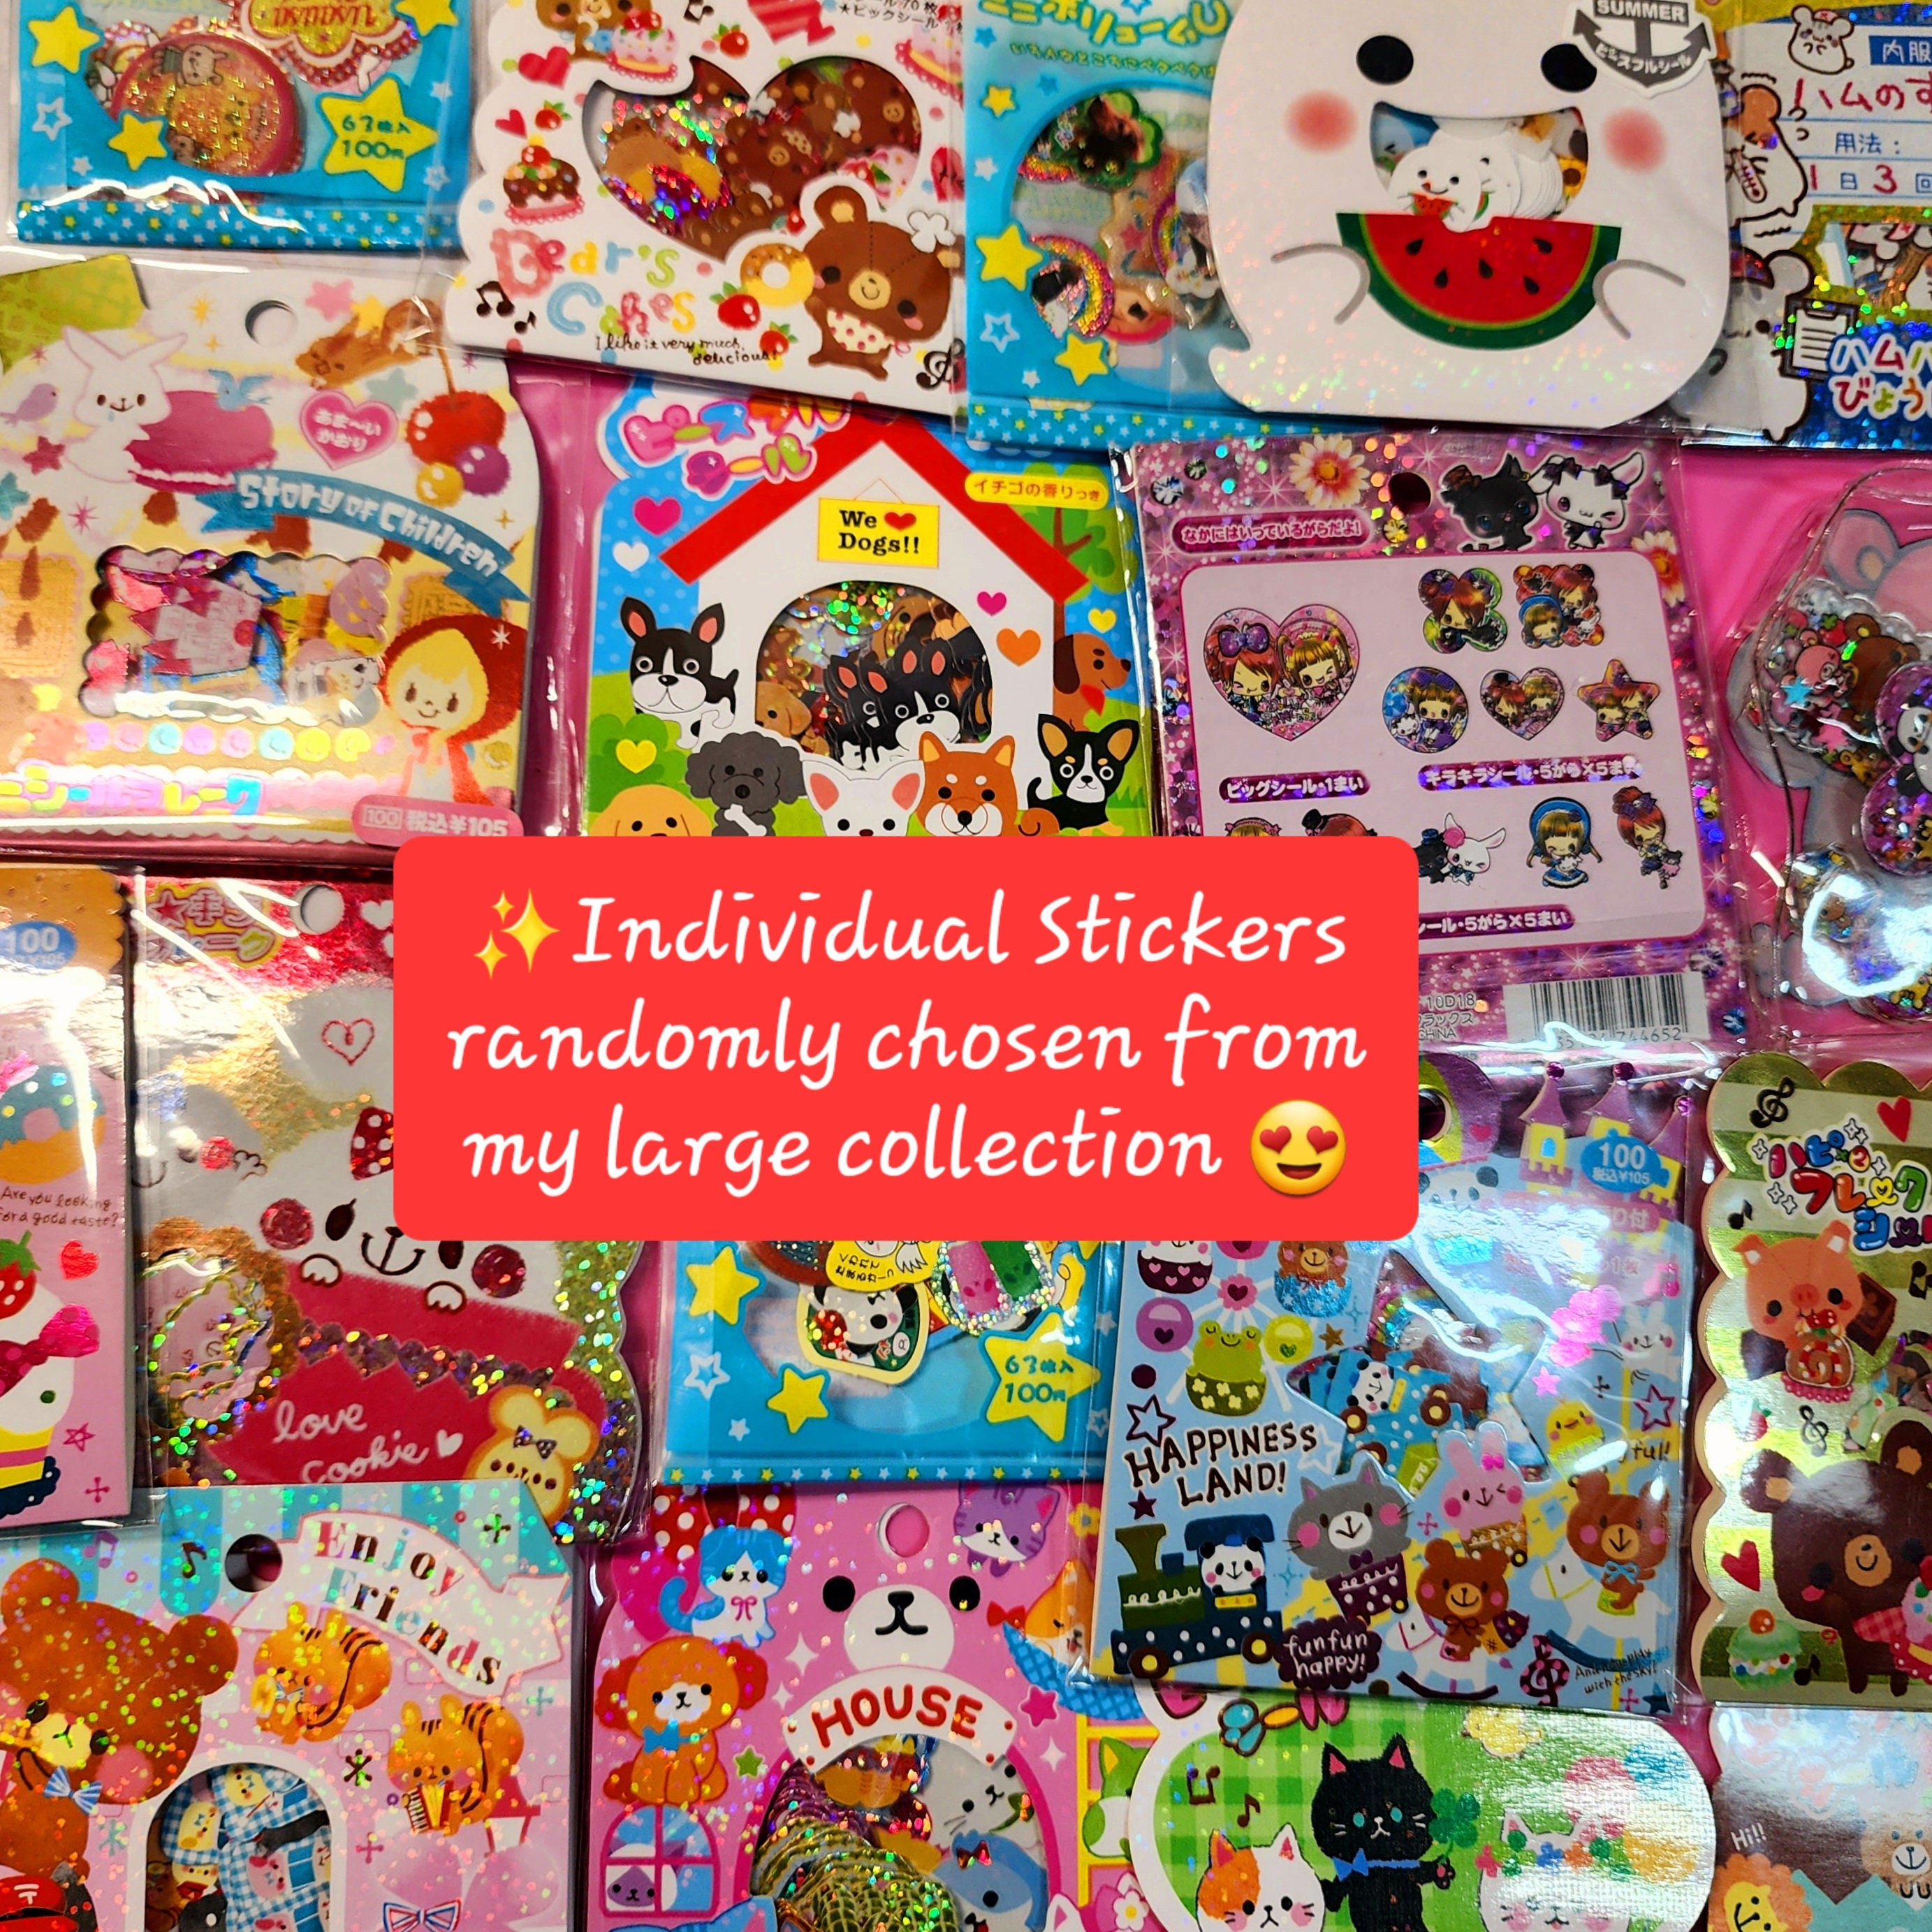 Kamio Decole Style Scrapbooking Stickers: Chinese Food